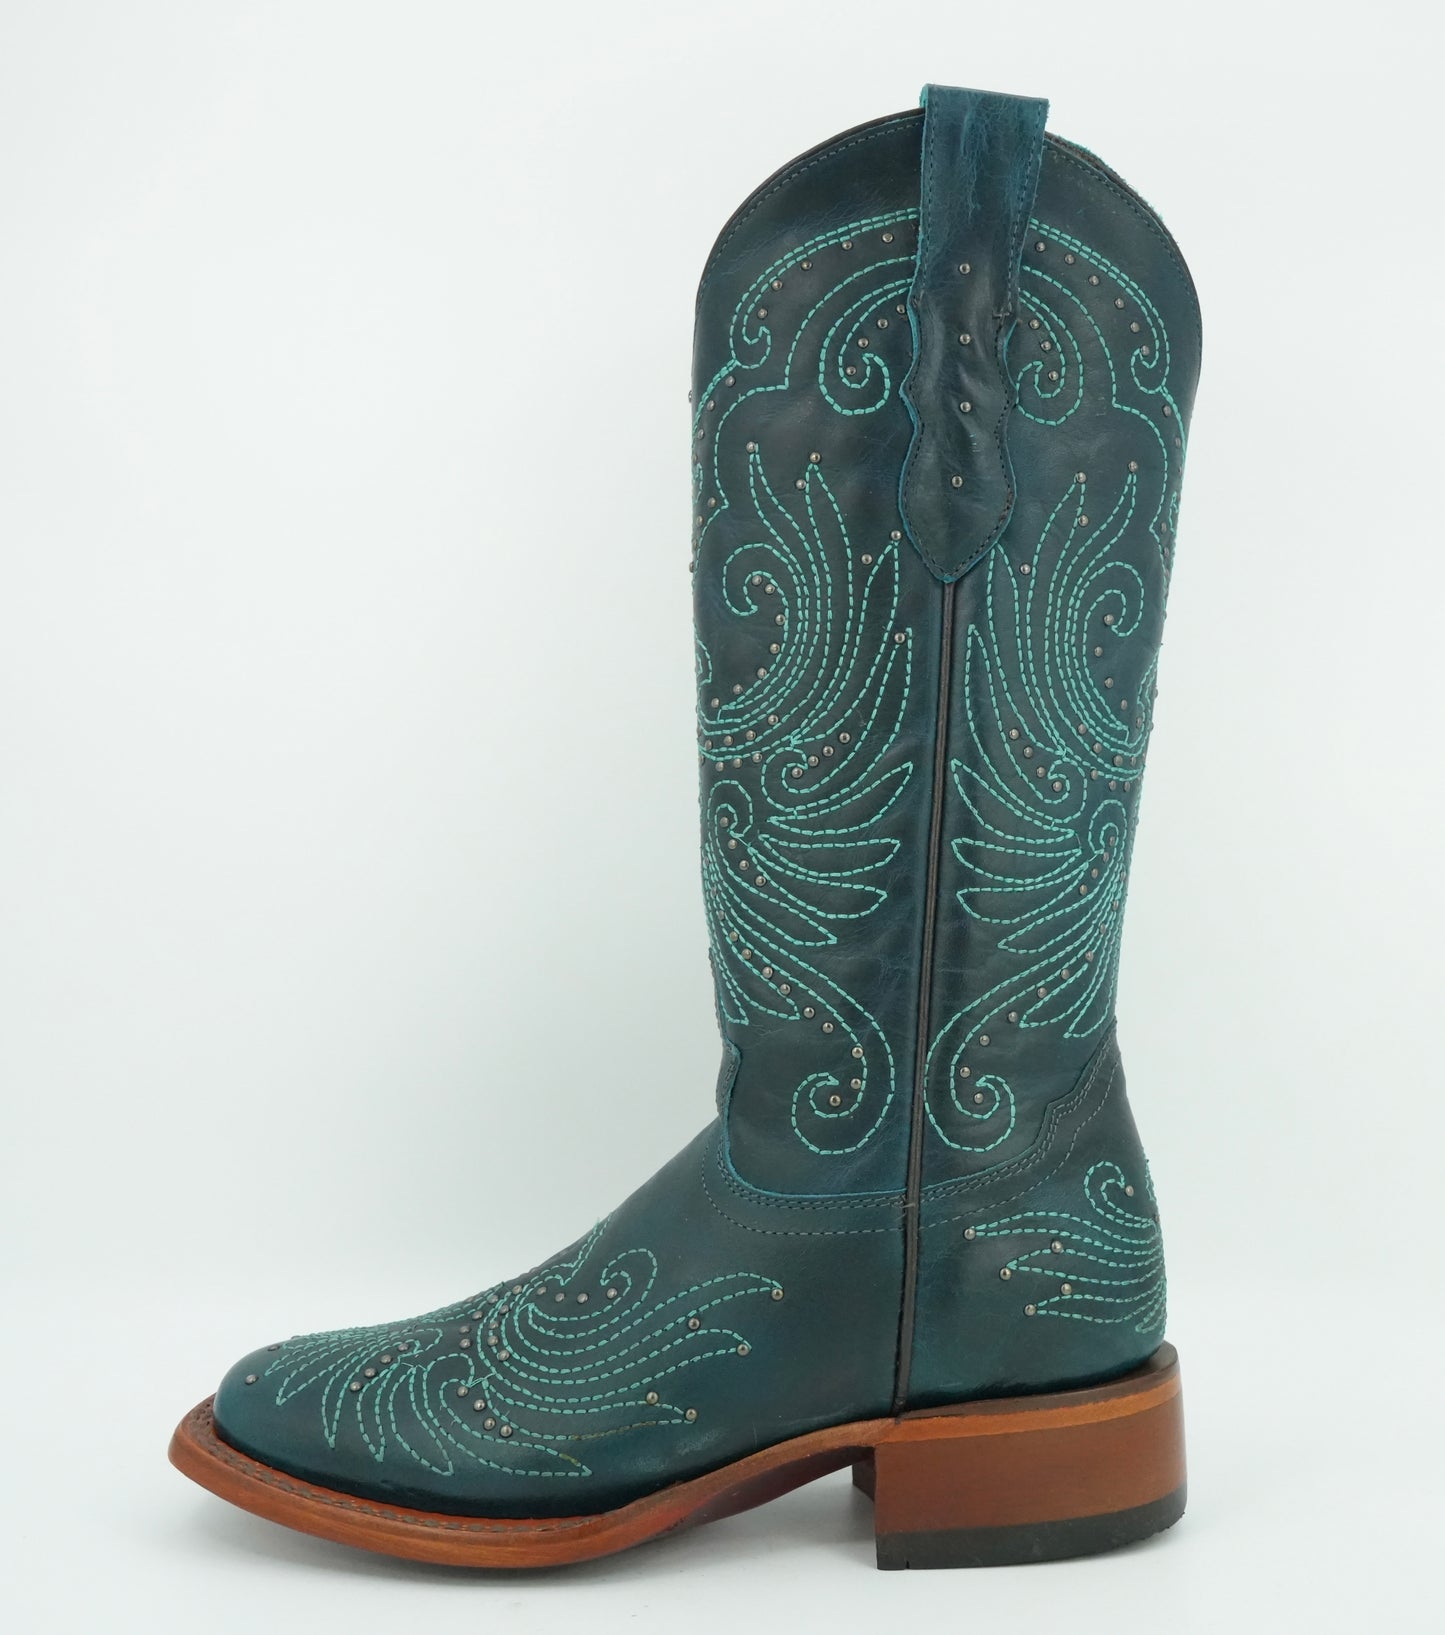 Quincy Women's Embroidered Crazy Dark Turquoise Square Toe Boot